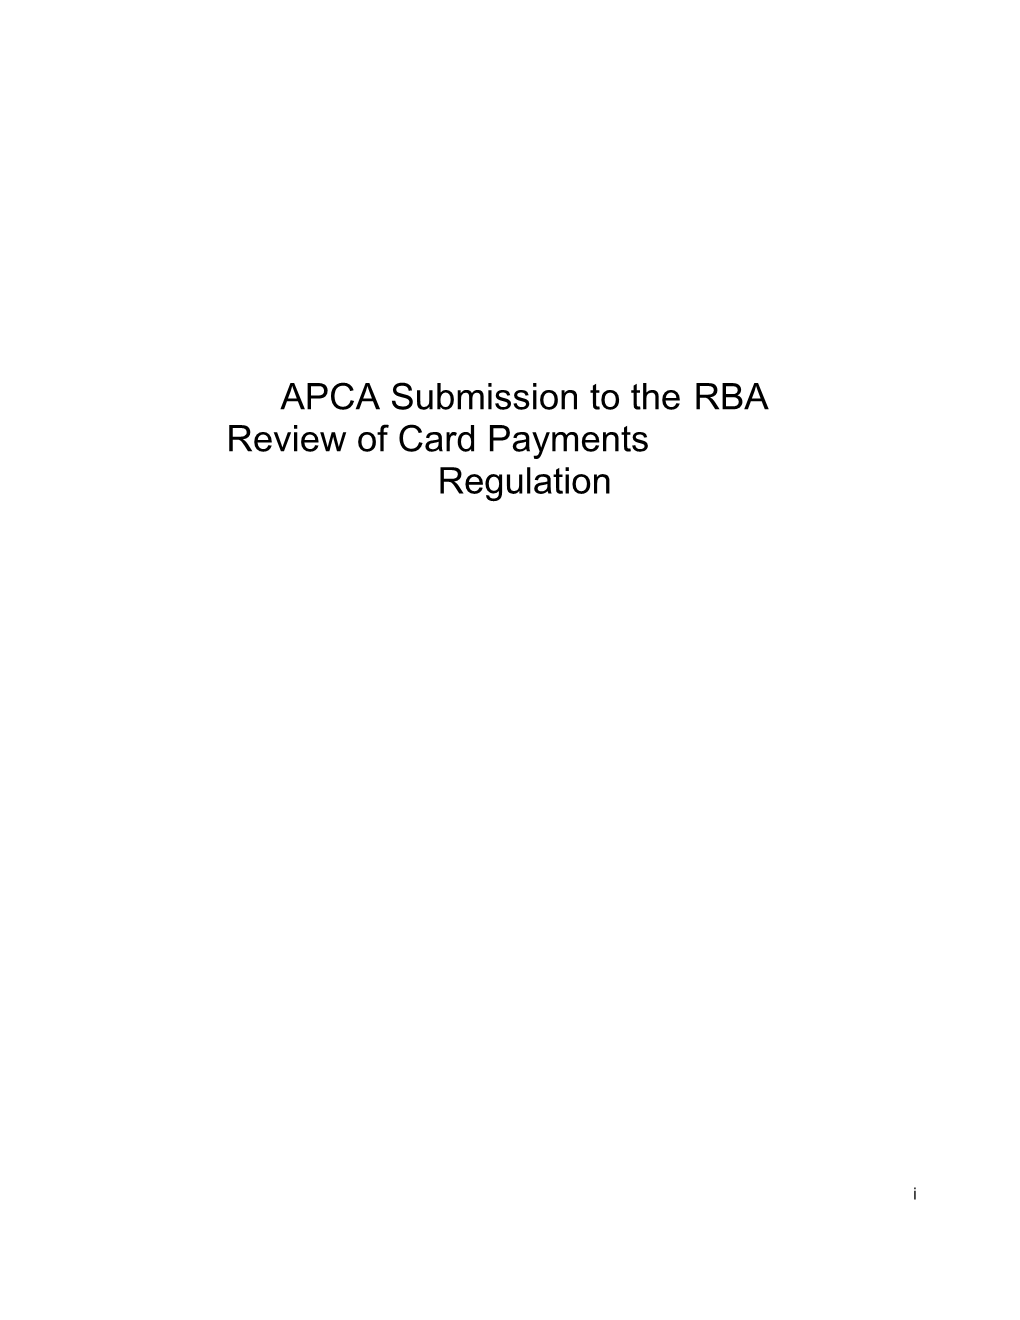 APCA RBA Card Review Submission 24 April FINAL